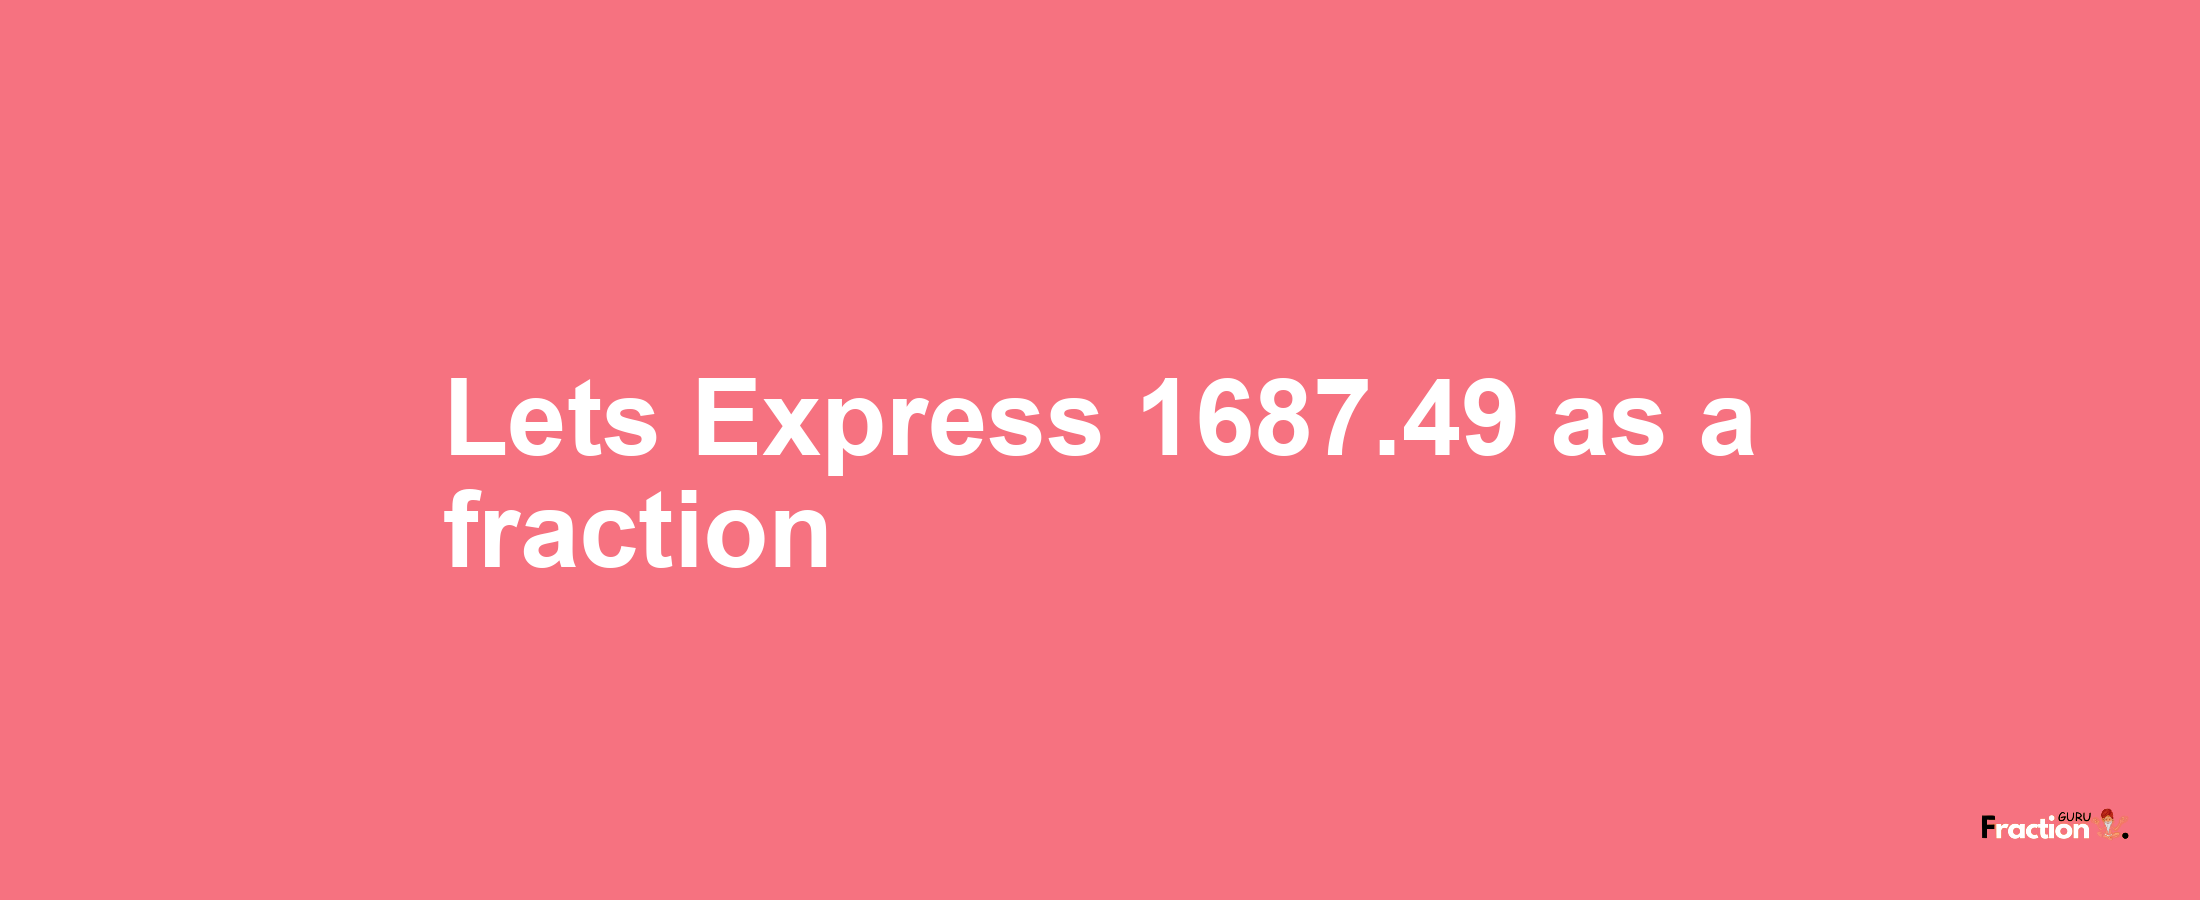 Lets Express 1687.49 as afraction